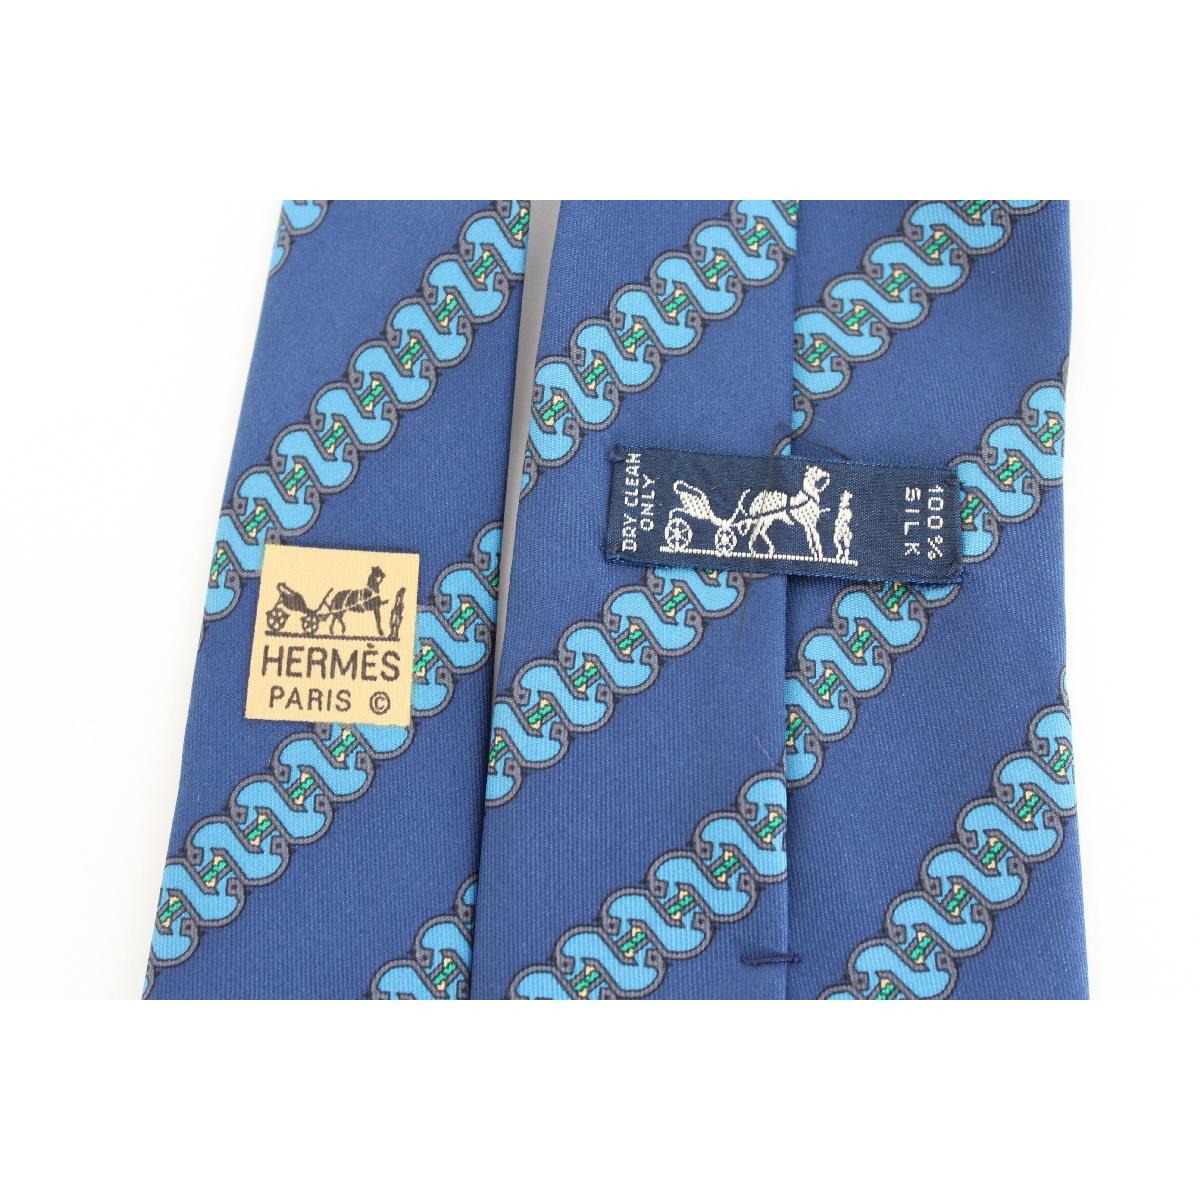 Hermes vintage tie 7161 FA model, with animal blue snake print, made in France. Vintage, excellent condition

Length: about 140 cm
Width: about 8 cm